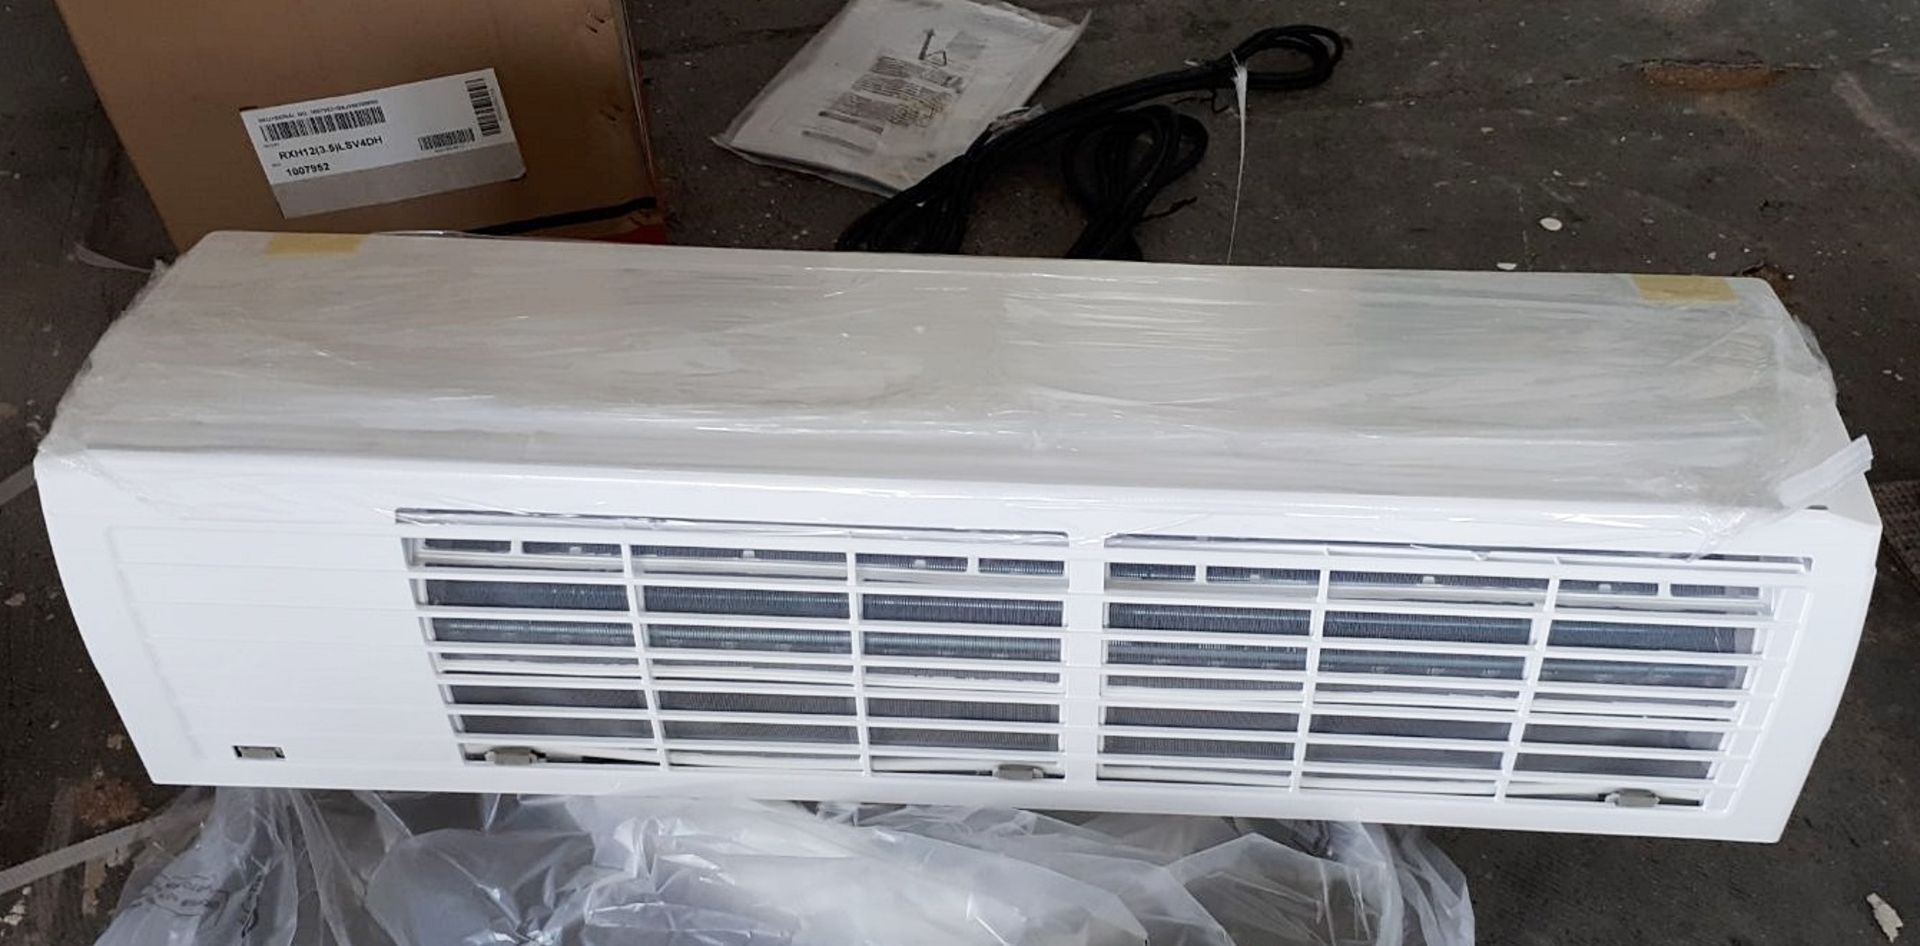 10 x Nortex 'Reznor' Air Conditioning 5.3kw& Mini Split Systems - Model RHH18 -Brand New Boxed Stock - Image 5 of 5